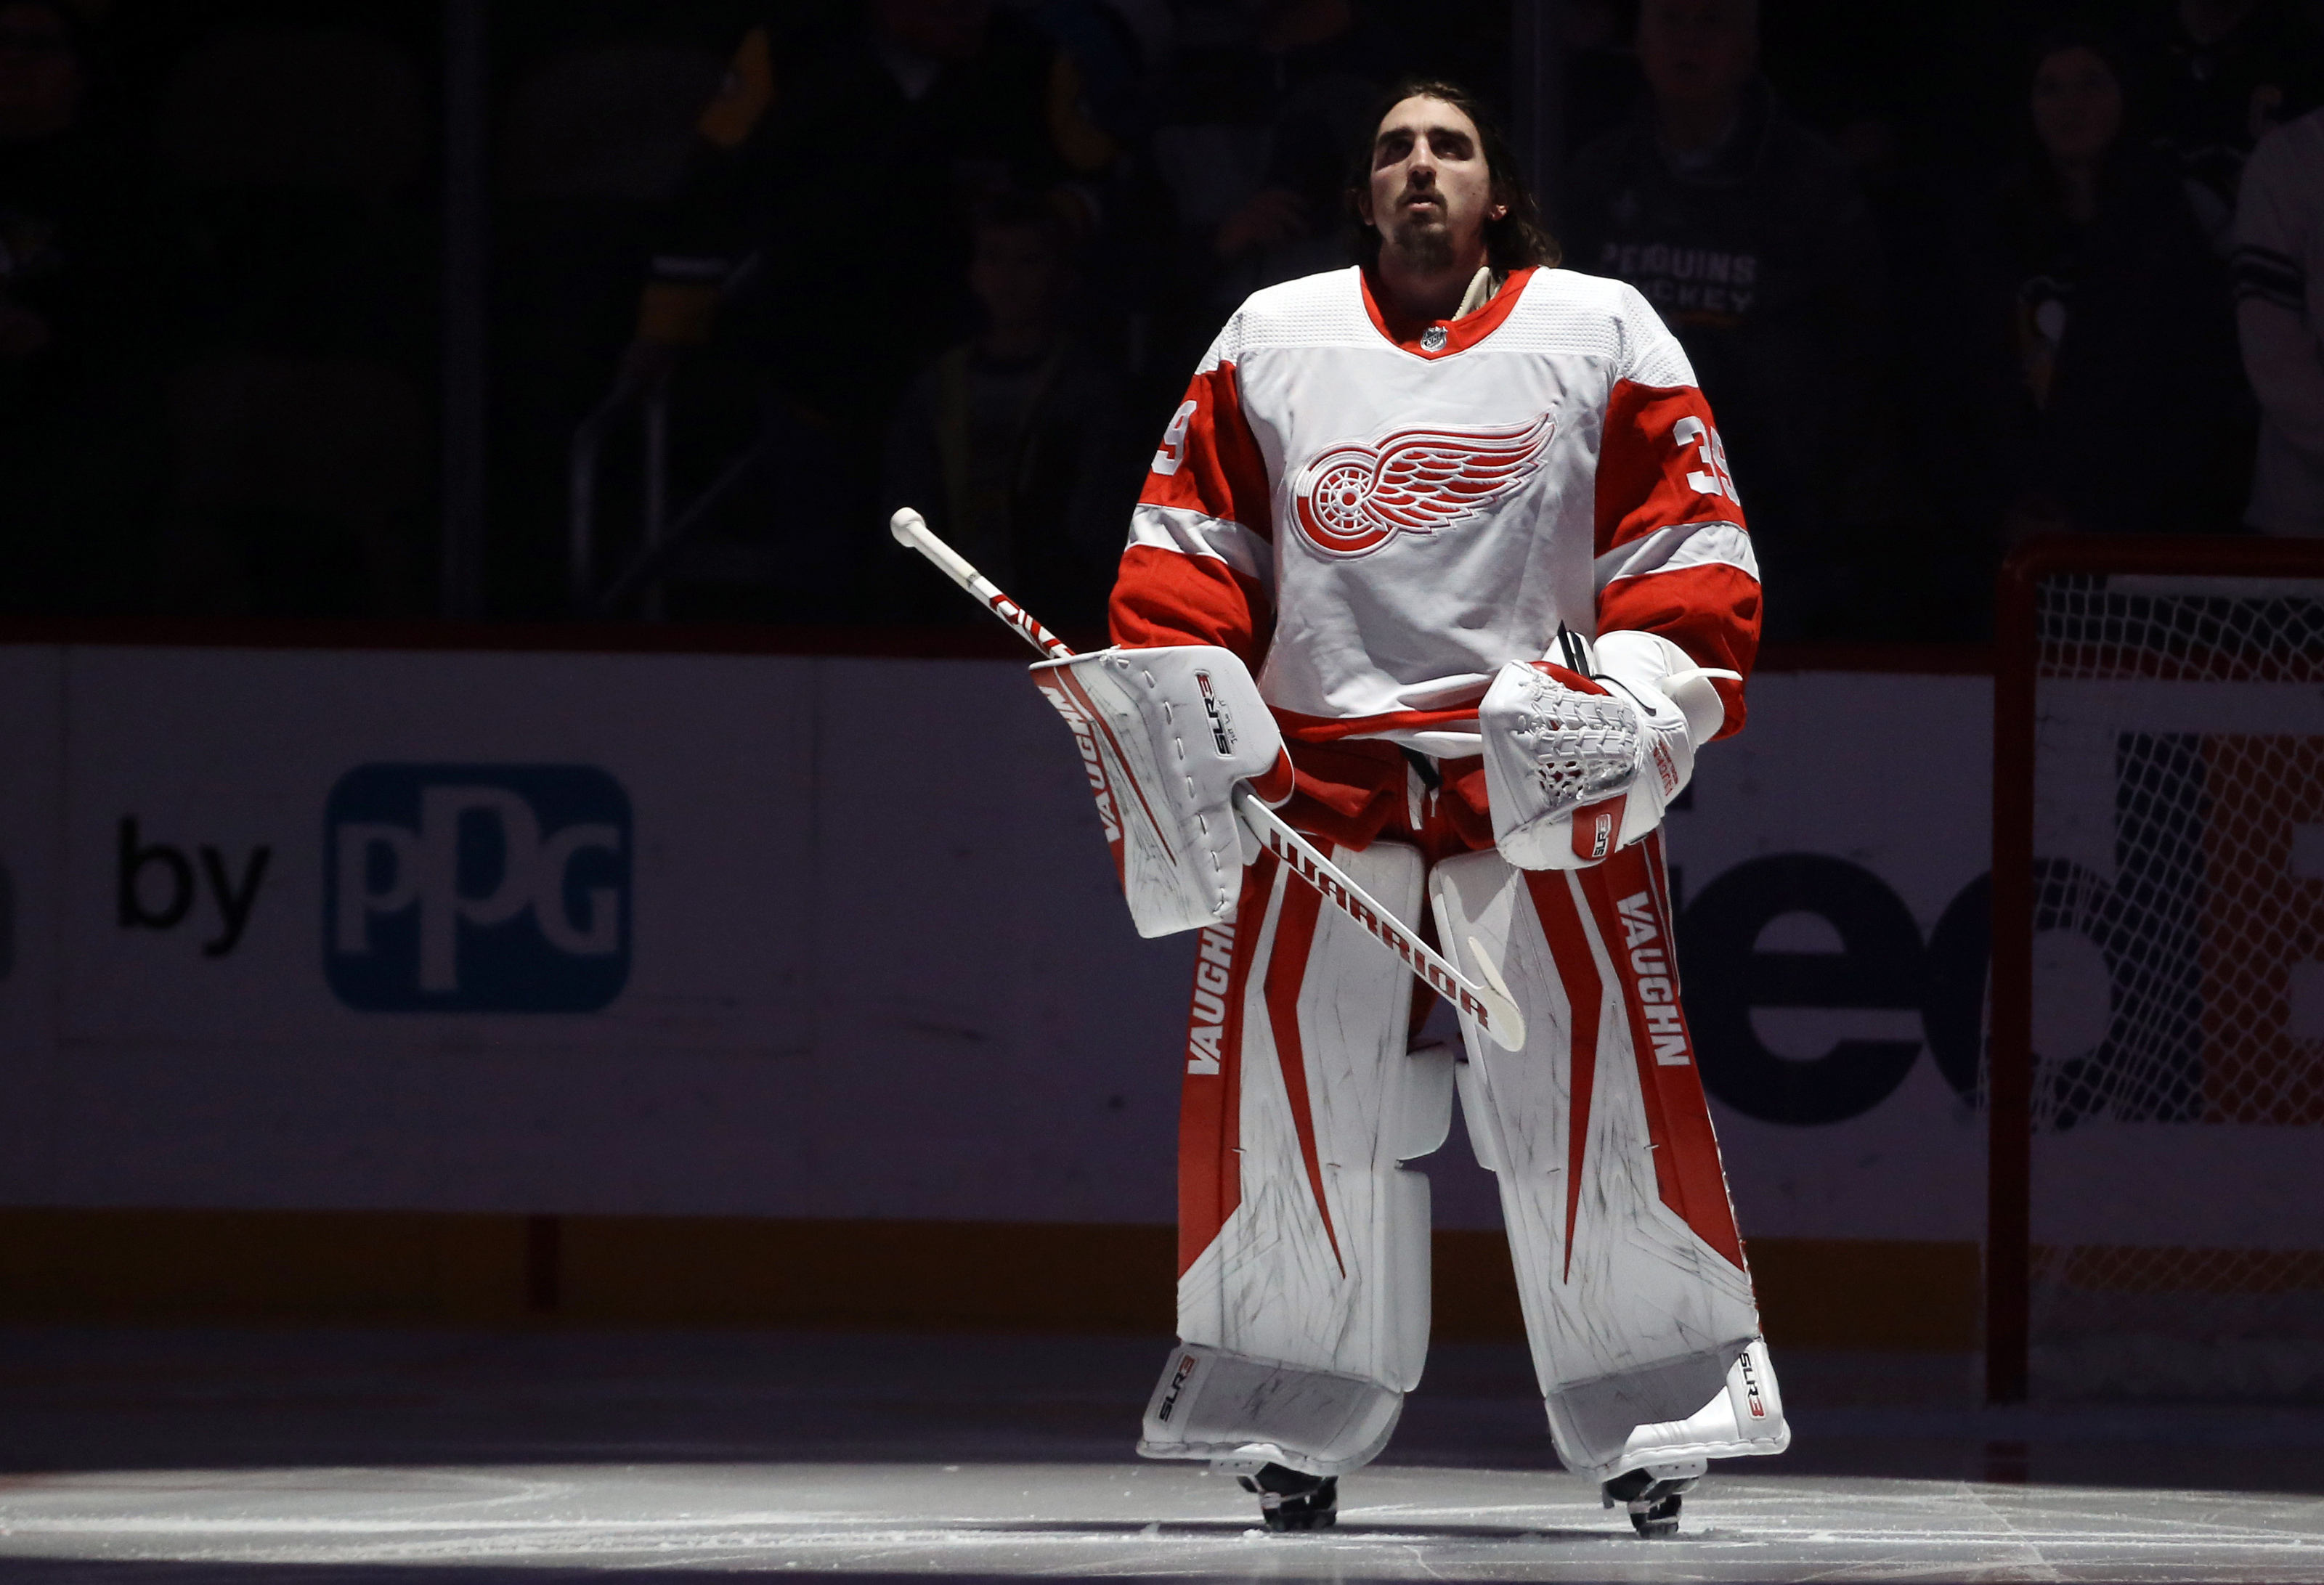 Red Wings acquire goalie Alex Nedeljkovic from Hurricanes